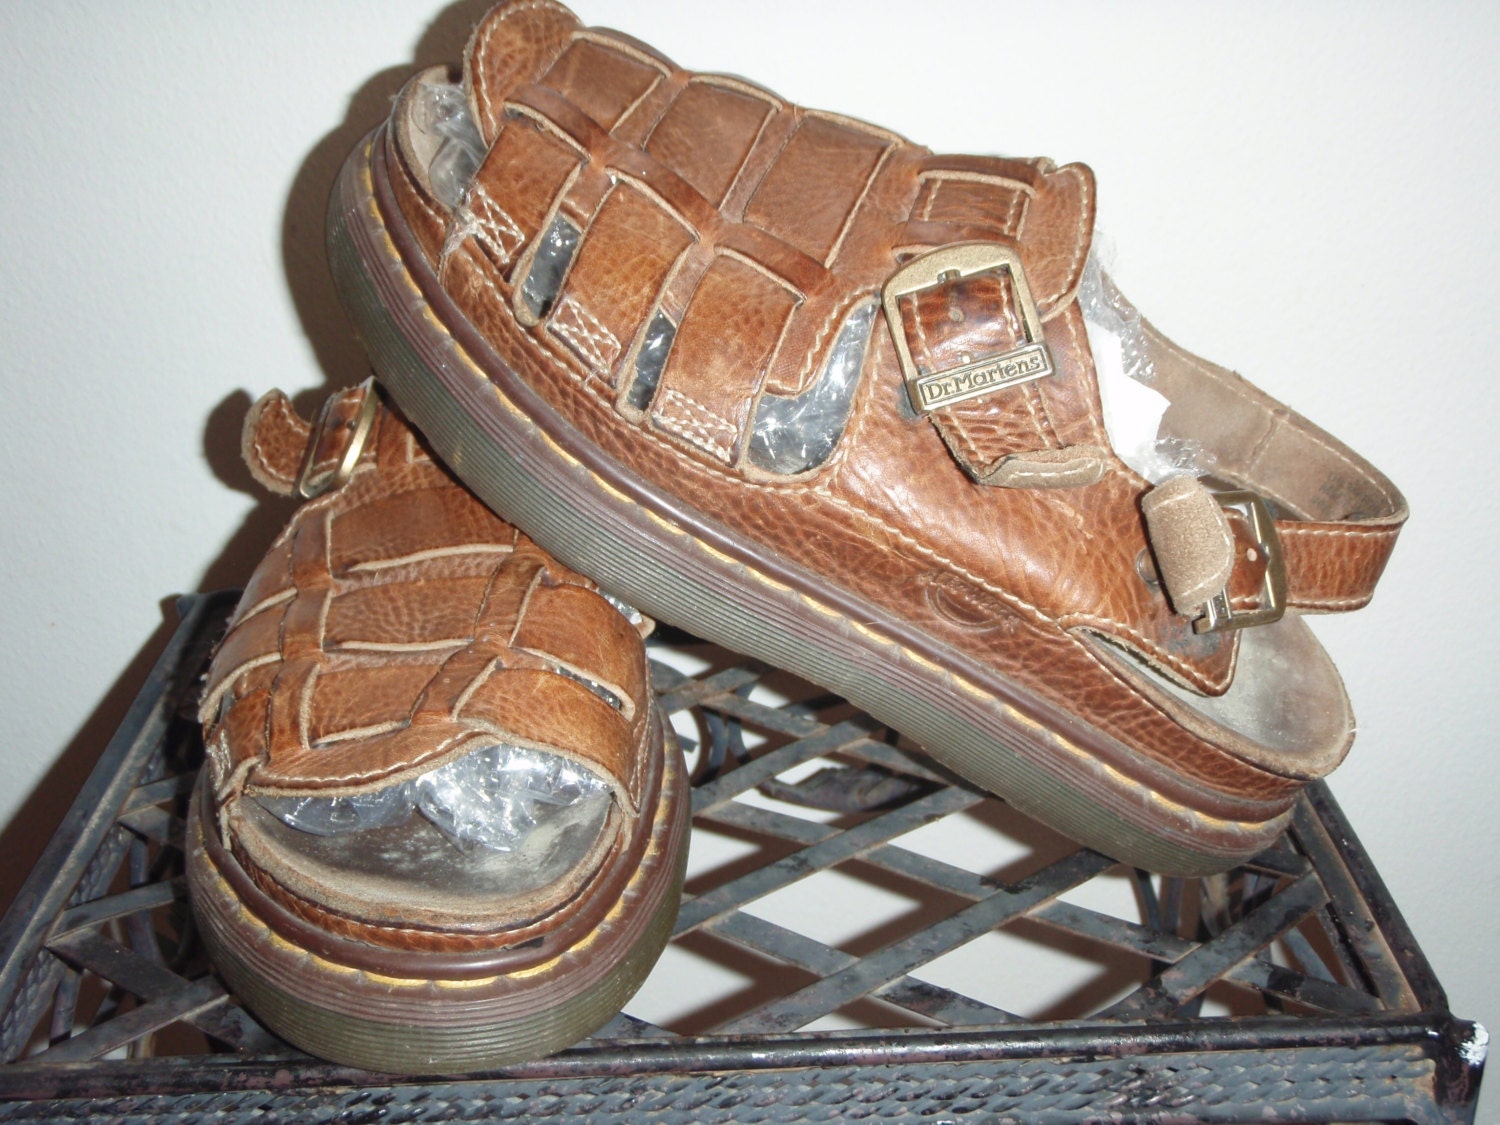 Vintage 90s Dr Martens heavy duty leather sandals woven style size 12